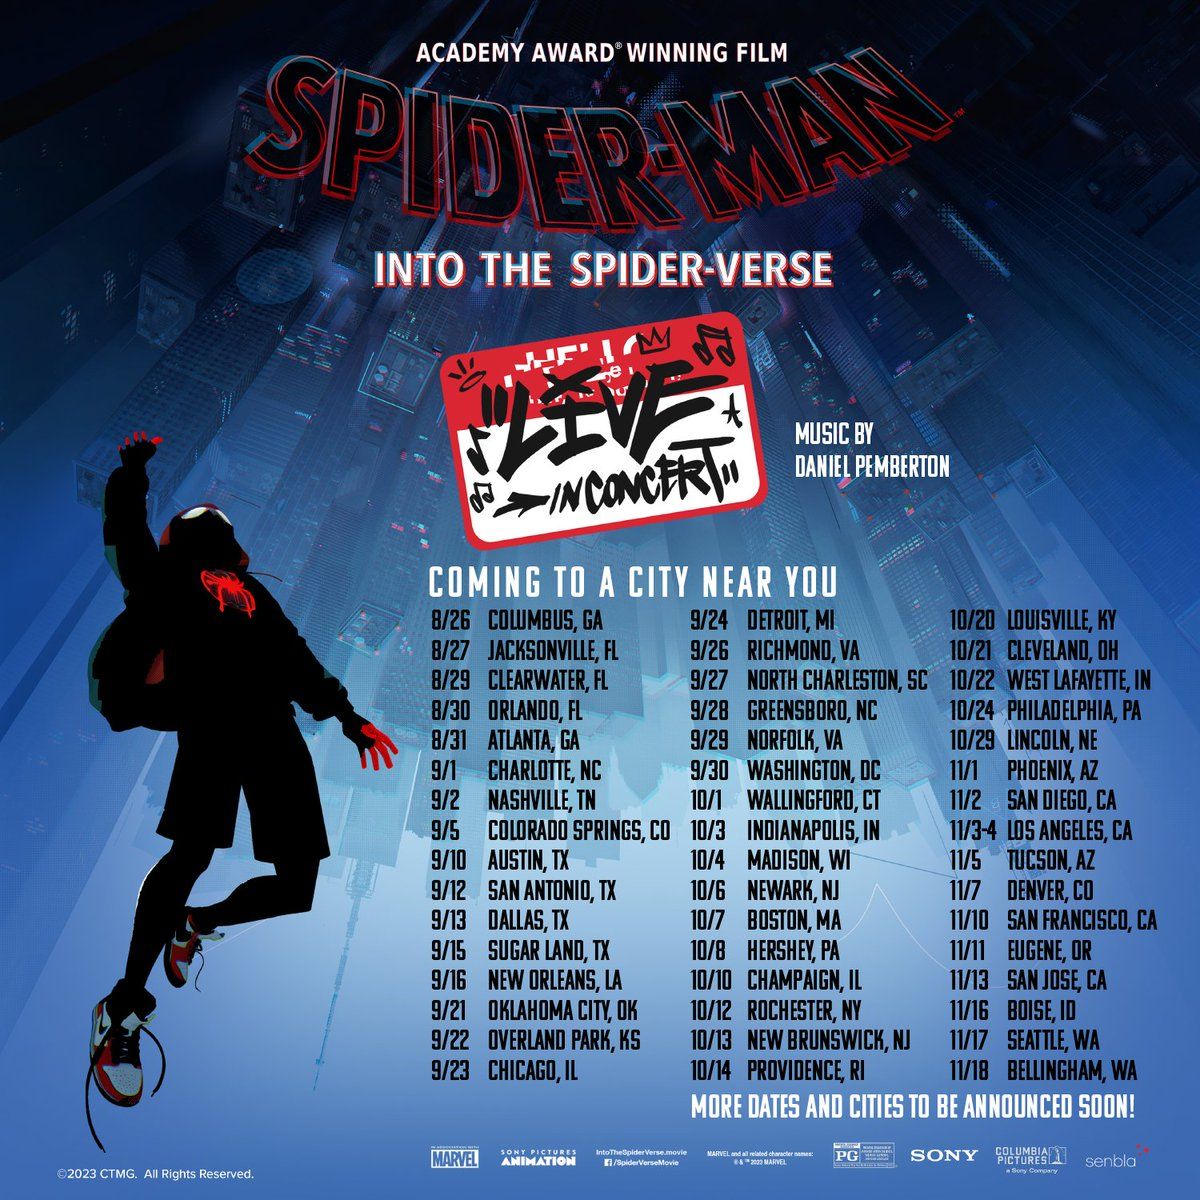 Spider-Man: Across The Spider-Verse Live In Concert